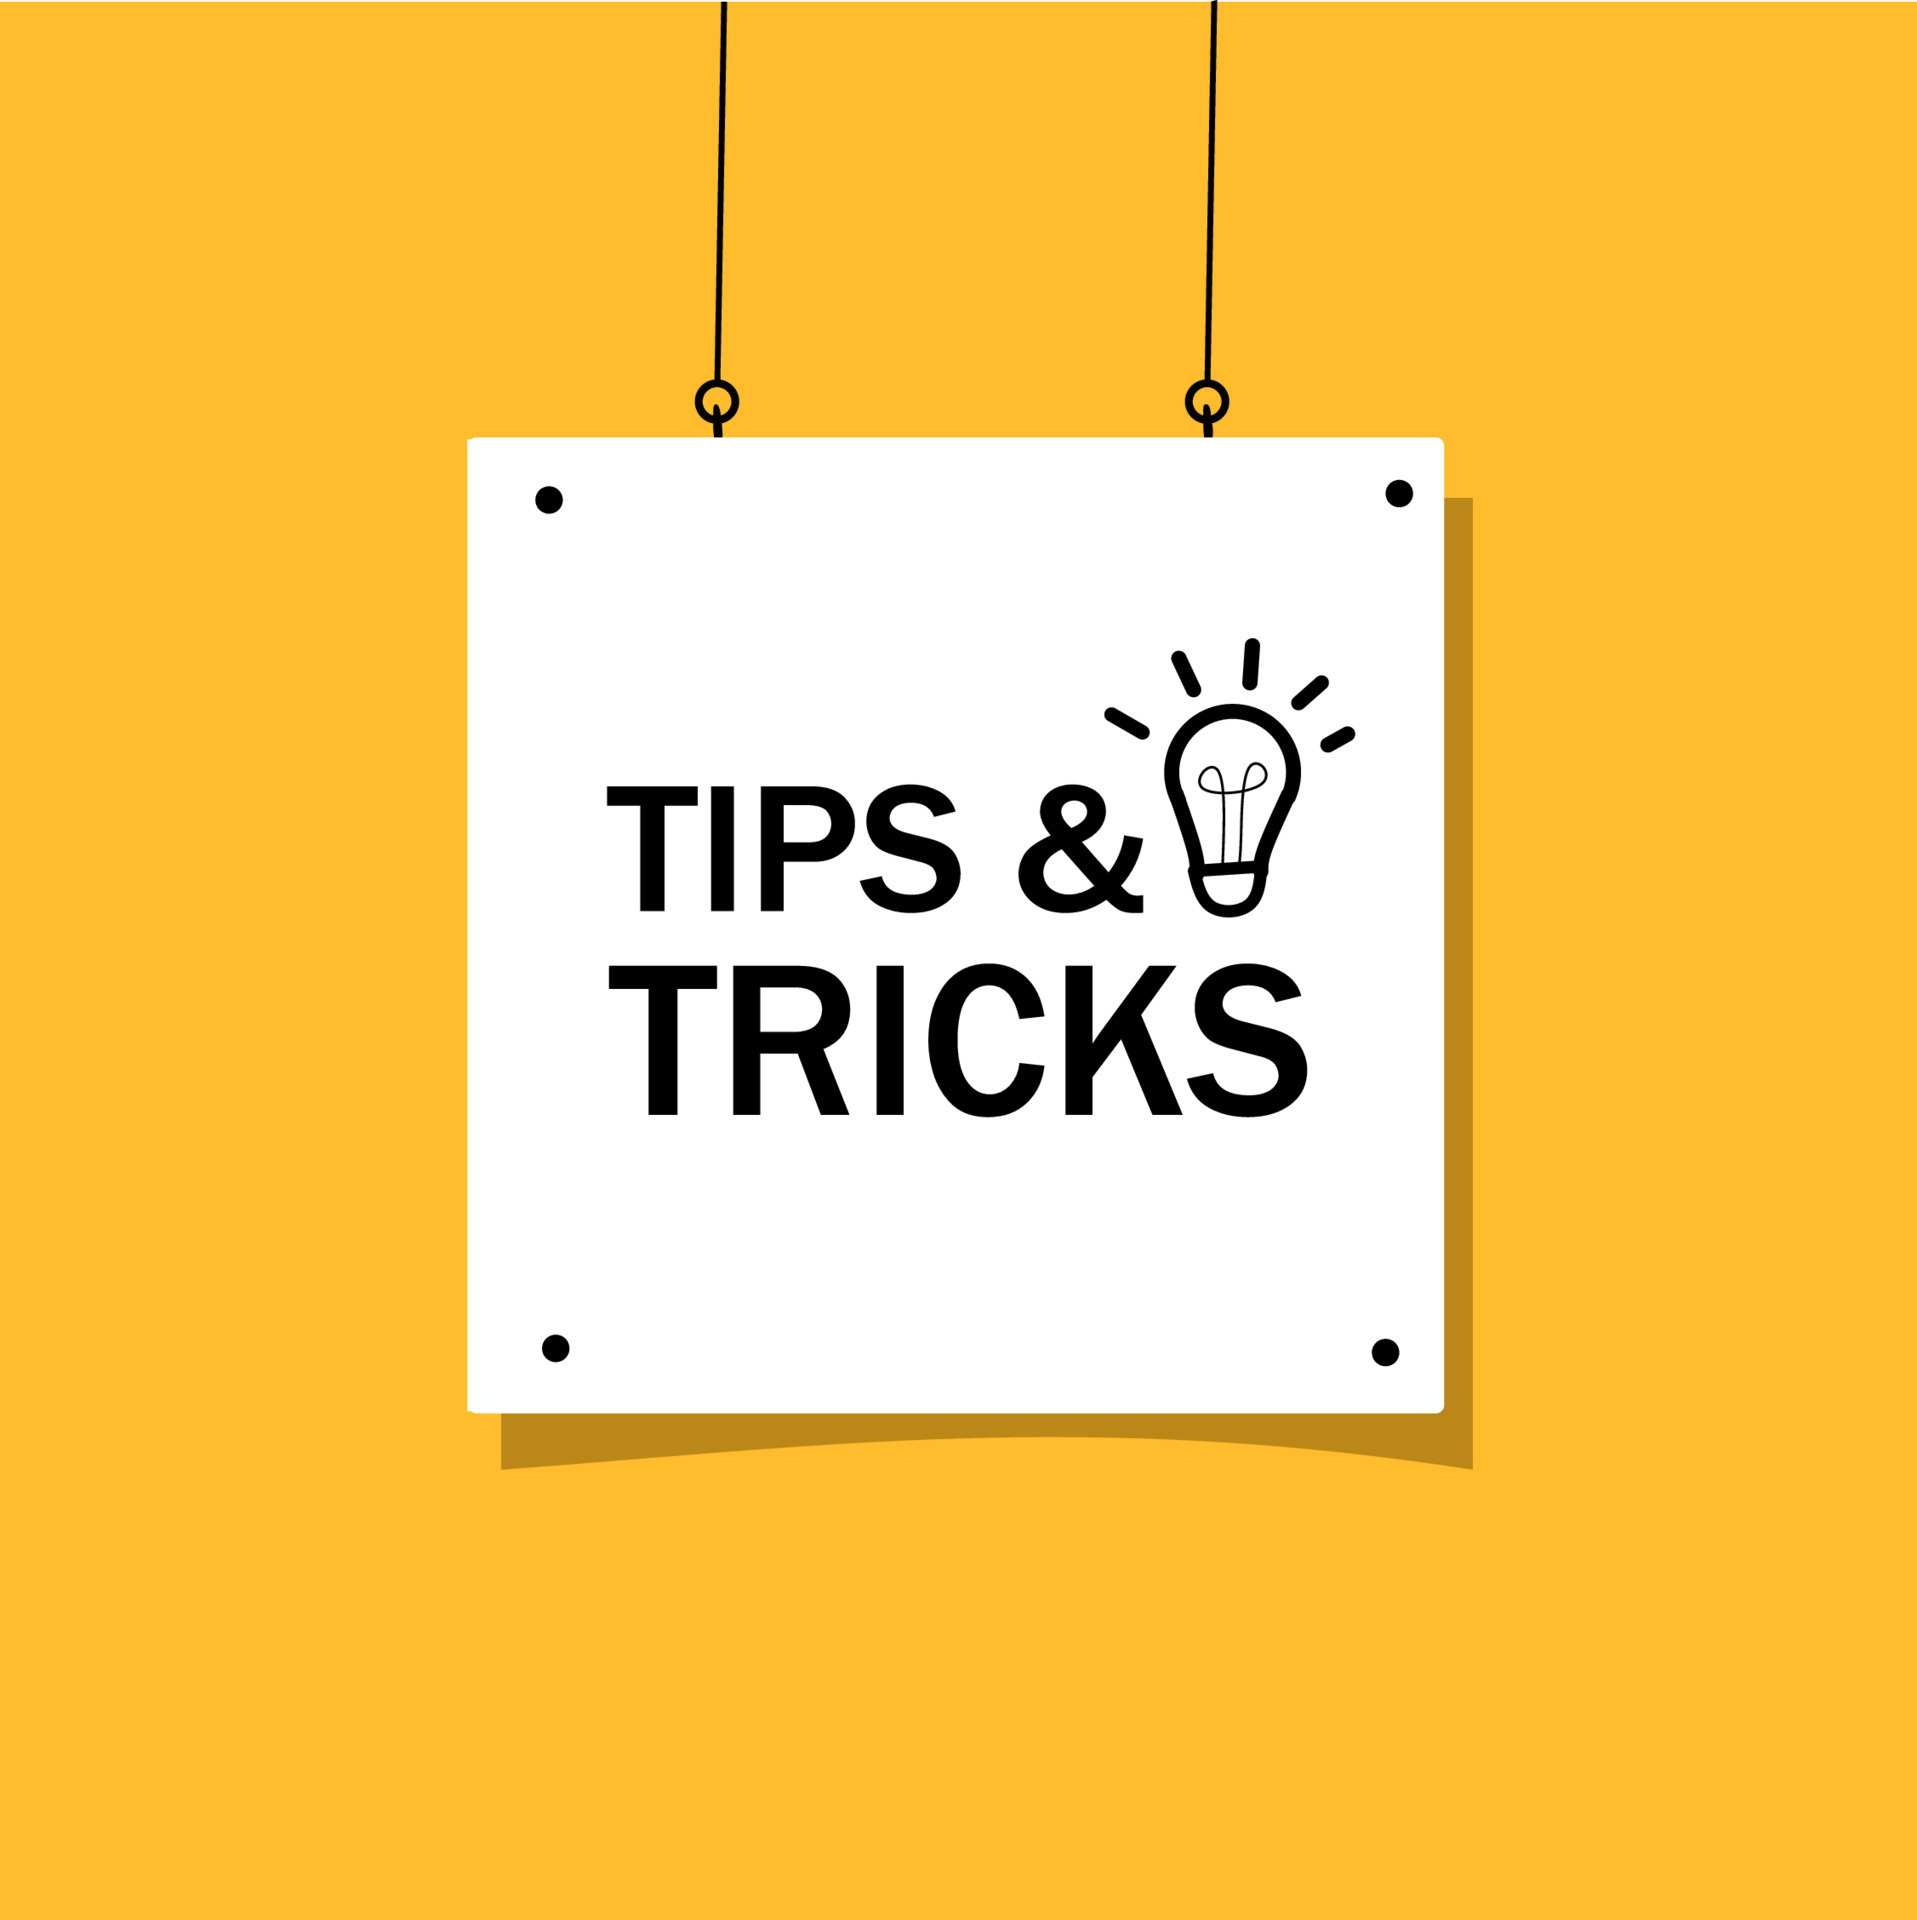 "Tips and tricks" written on a yellow background.